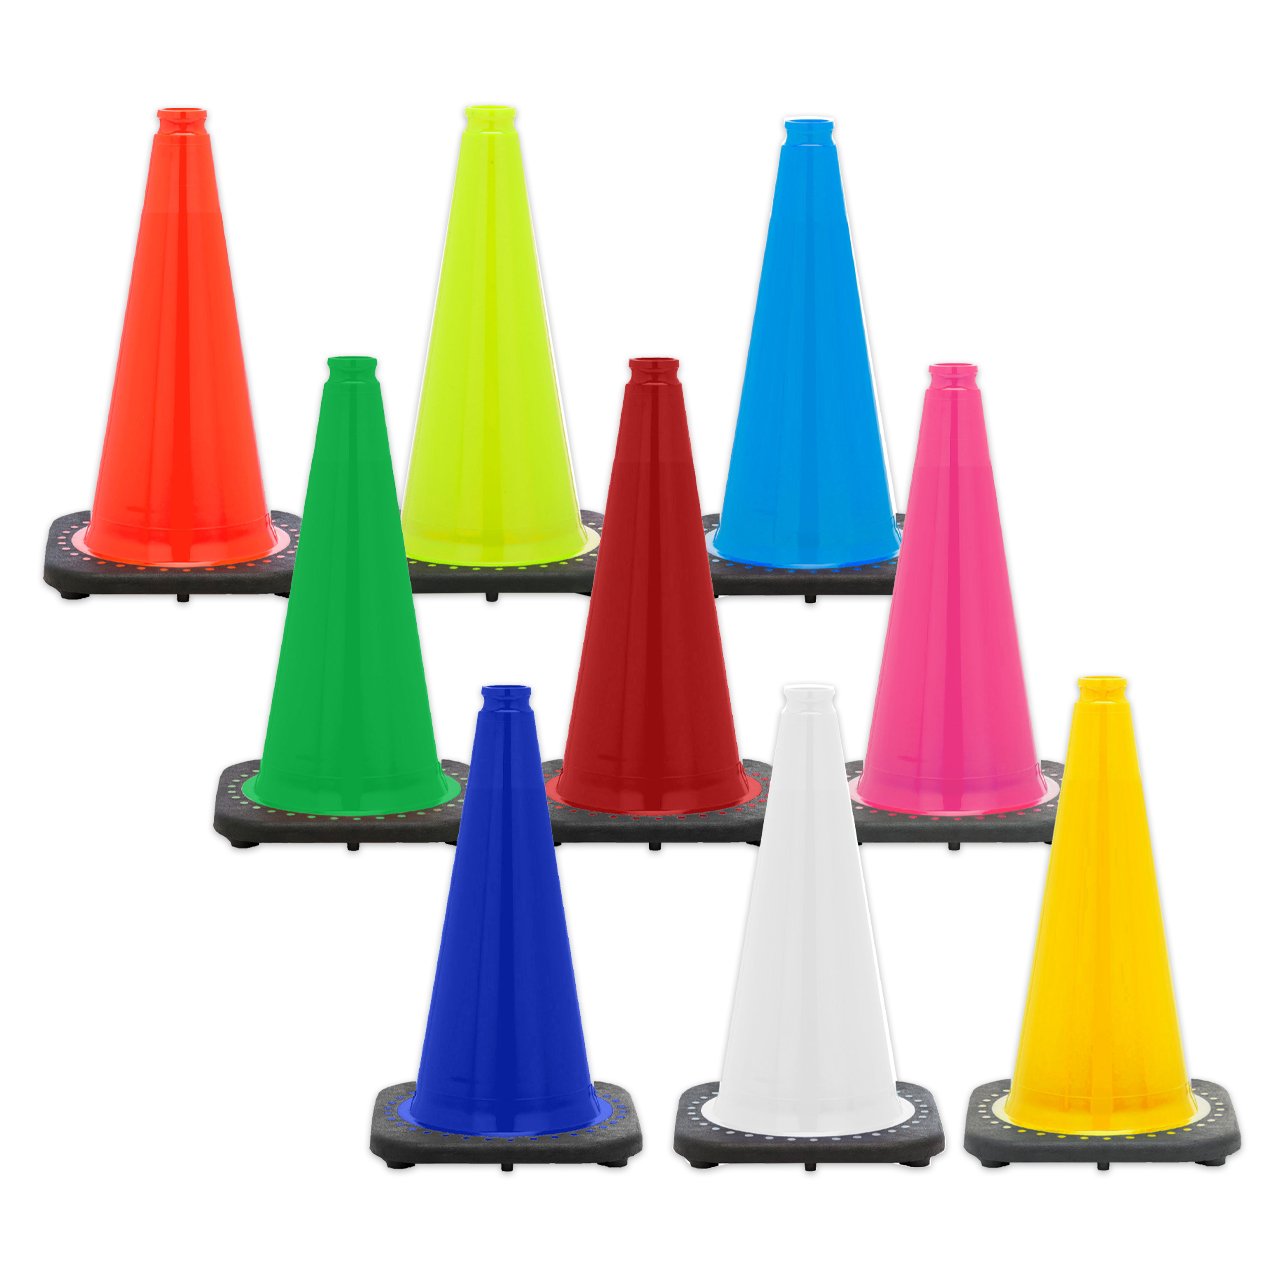 18" Traffic Safety Cone Black Base, 3lbs Traffic Cones For Less